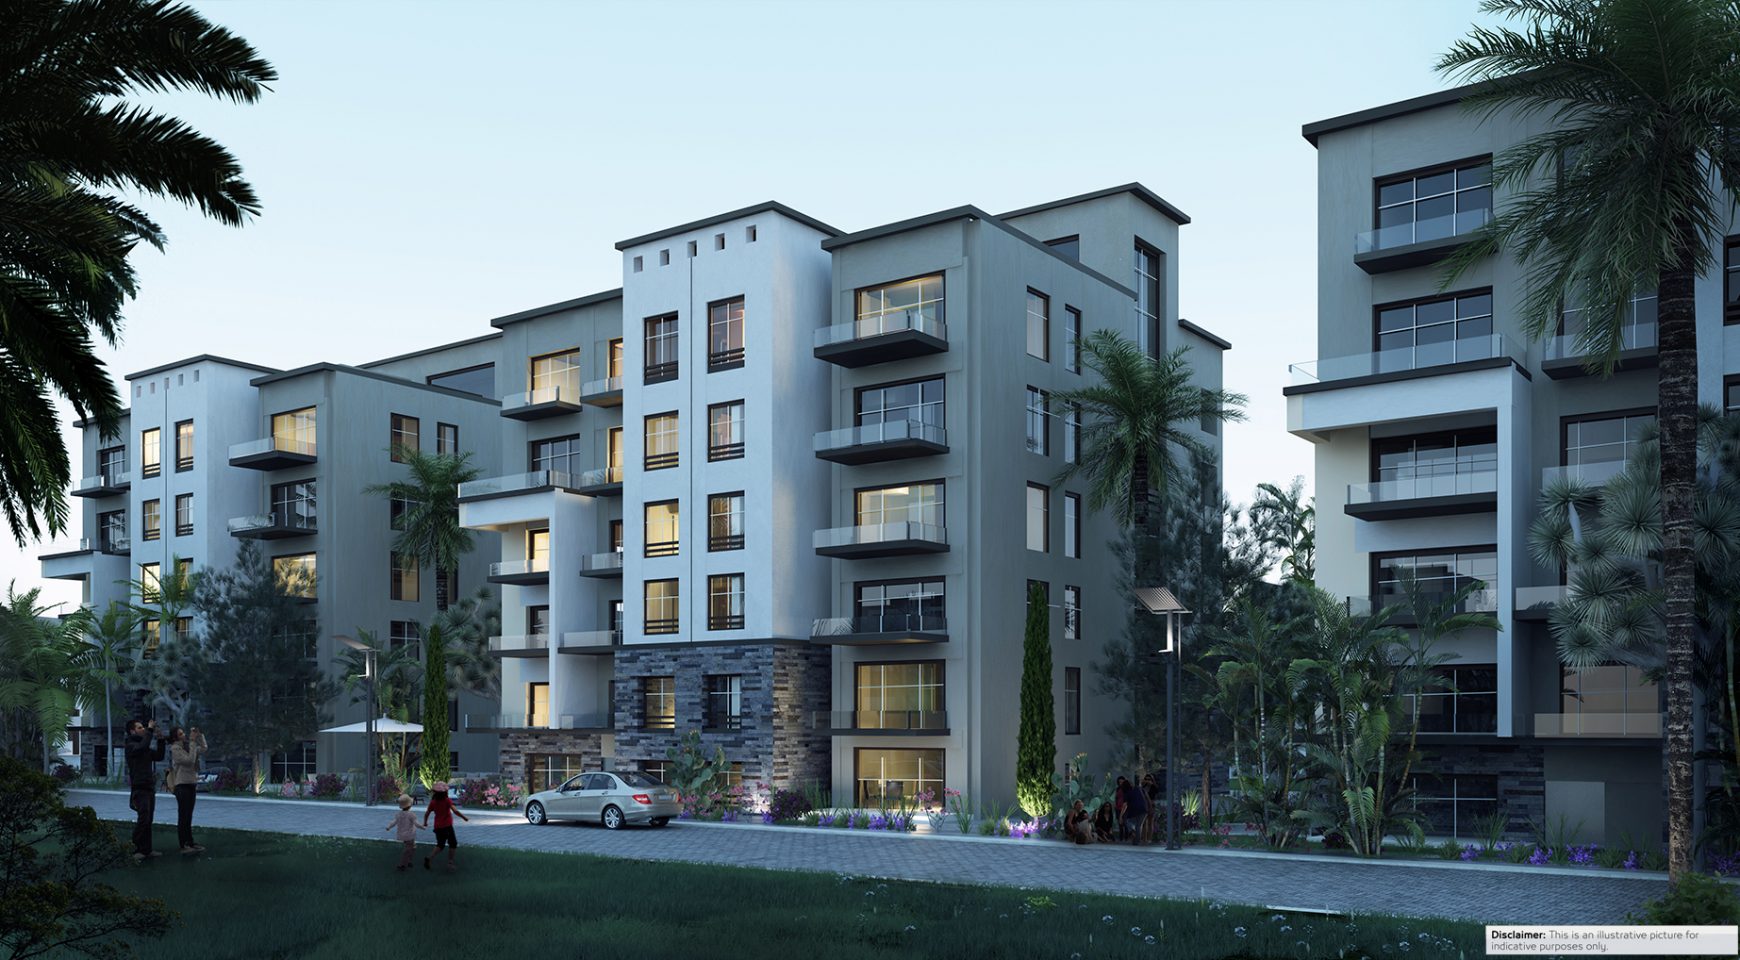 Own your apartment in Neopolis Wadi Degla with an area starting from 150 m²